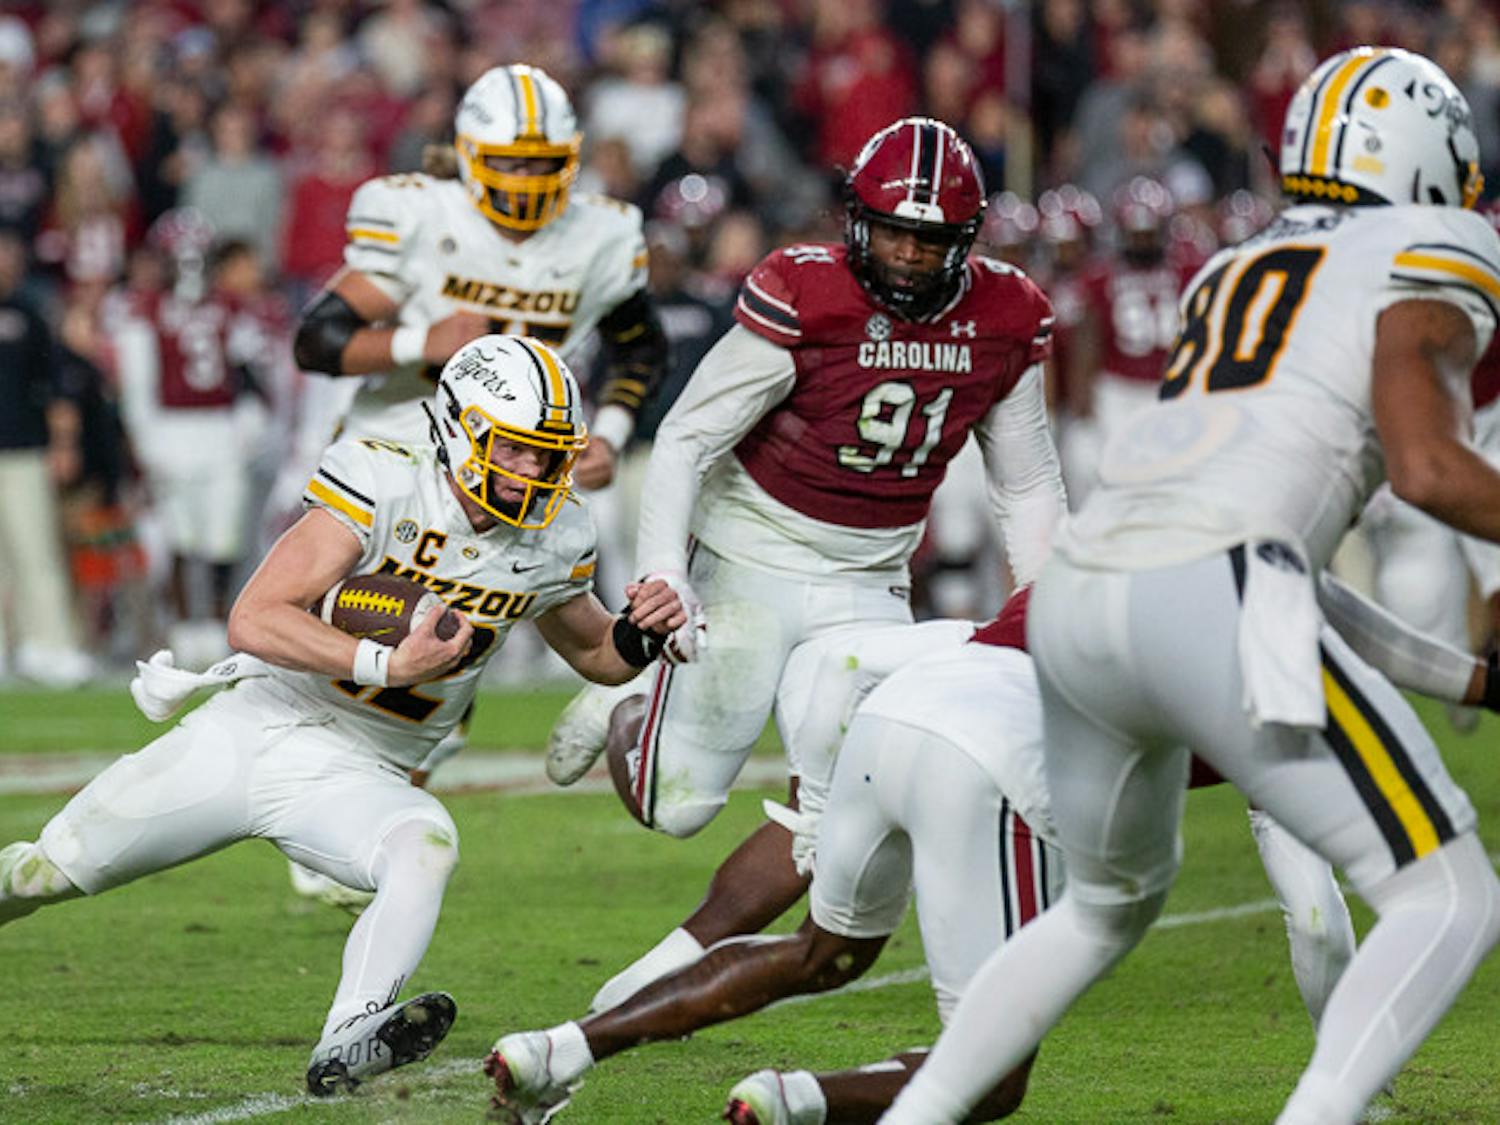 Missouri sophomore quarterback Brady Cook attempts to sneak the ball down the field during the South Carolina vs. Missouri game on Oct. 29, 2022. The Tigers beat the Gamecocks 23-10.